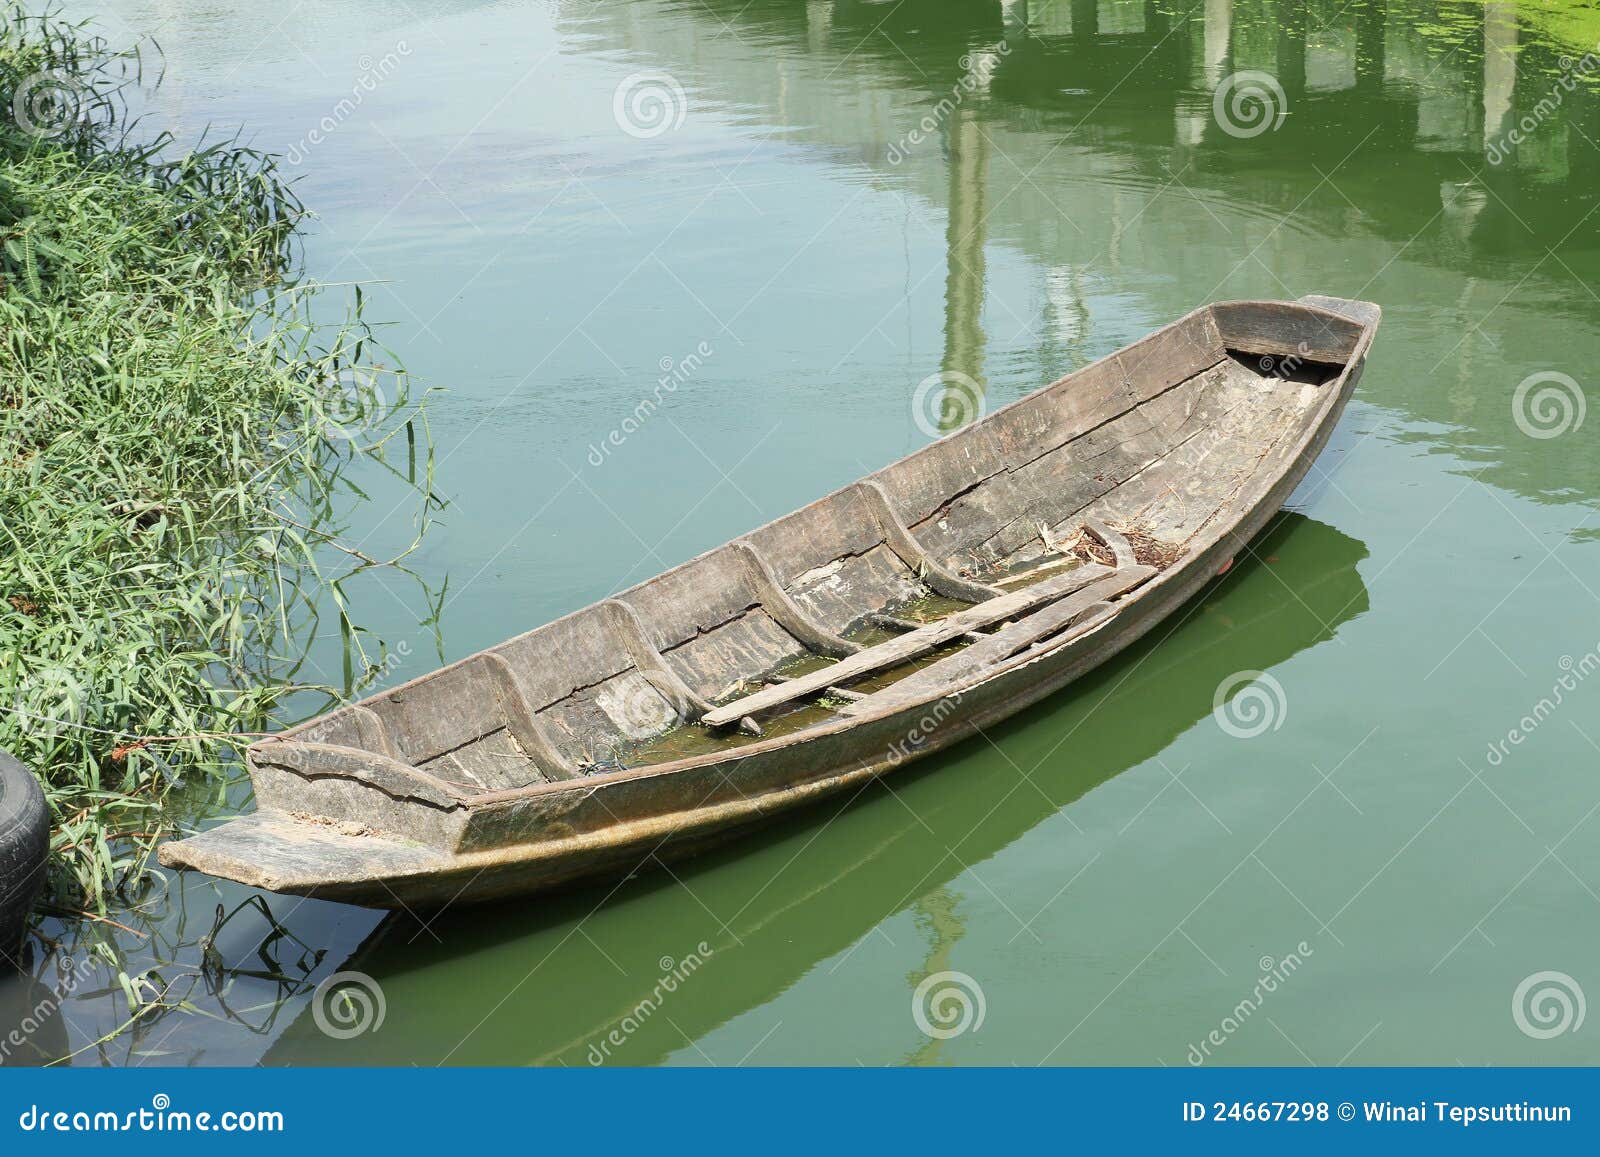 Old Wooden Boat Royalty Free Stock Photos - Image: 24667298